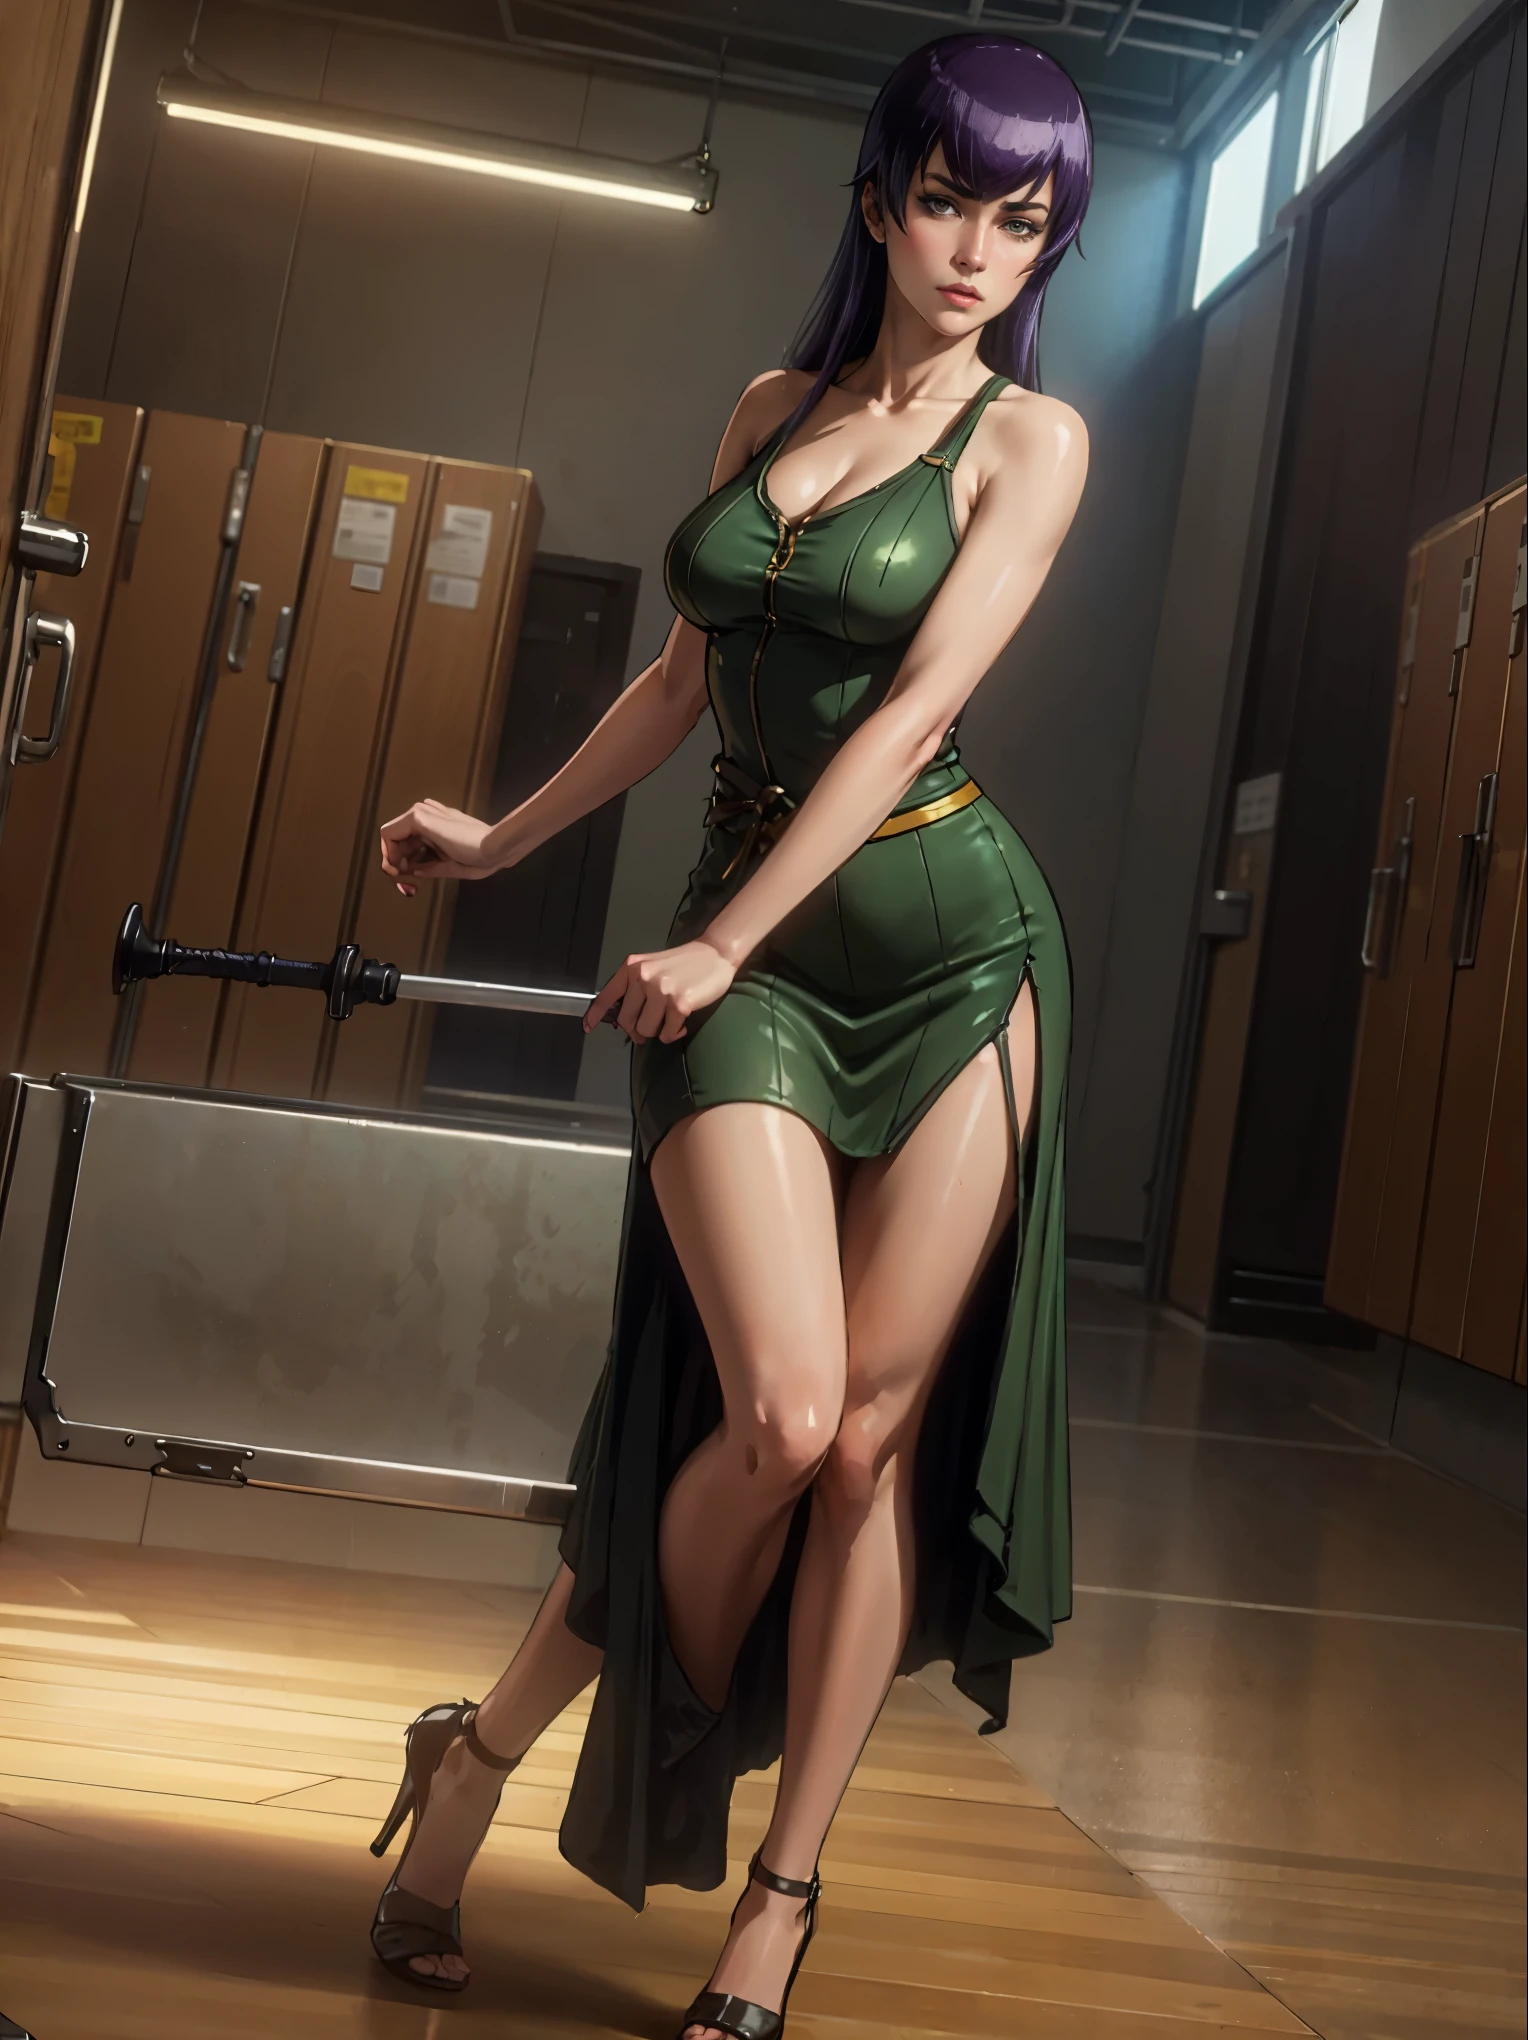 Very detailed, high quality, masterpiece, beautiful, saeko, long legs, 1 hand with wooden sword, 1 hand between the legs, long dress, avierto dress, long purple hair, high school dress, medra sword, sword in hand, full body, wide shot, gym, lockers, alone, closed room, style, (erotic atmosphere), very detailed, high quality, masterpiece, beautiful, 1 girl, standing, seen from below, prosthesis, sexy saeko, skirt, skirt moving, sword pointing, brown and green dress, full body, (best quality)), ((masterpiece: 1.2) ), (extremely detailed: 1.1), (8k, high quality, cinematic, hyper-realistic, illustration), (autodesk maya, octane rendering, unreal engine, game character, ray tracing, hdr), (16mm focal length, f/4 aperture, dynamic perspective, depth of field), (1 girl, dynamic angle , casting pose. saeko, big breasts and small hips, hidden masturbation, looking at the viewer, red cheeks, high heels, long open skirt, visible breasts and vagina, gym, benches and lockers around her), 3d, realistic, CG , 3D model, beautiful, elegant, safe (hdri, bloom, edge lighting, soft lighting, discreet.  ), zhongfenghua, delicate\(sex\)